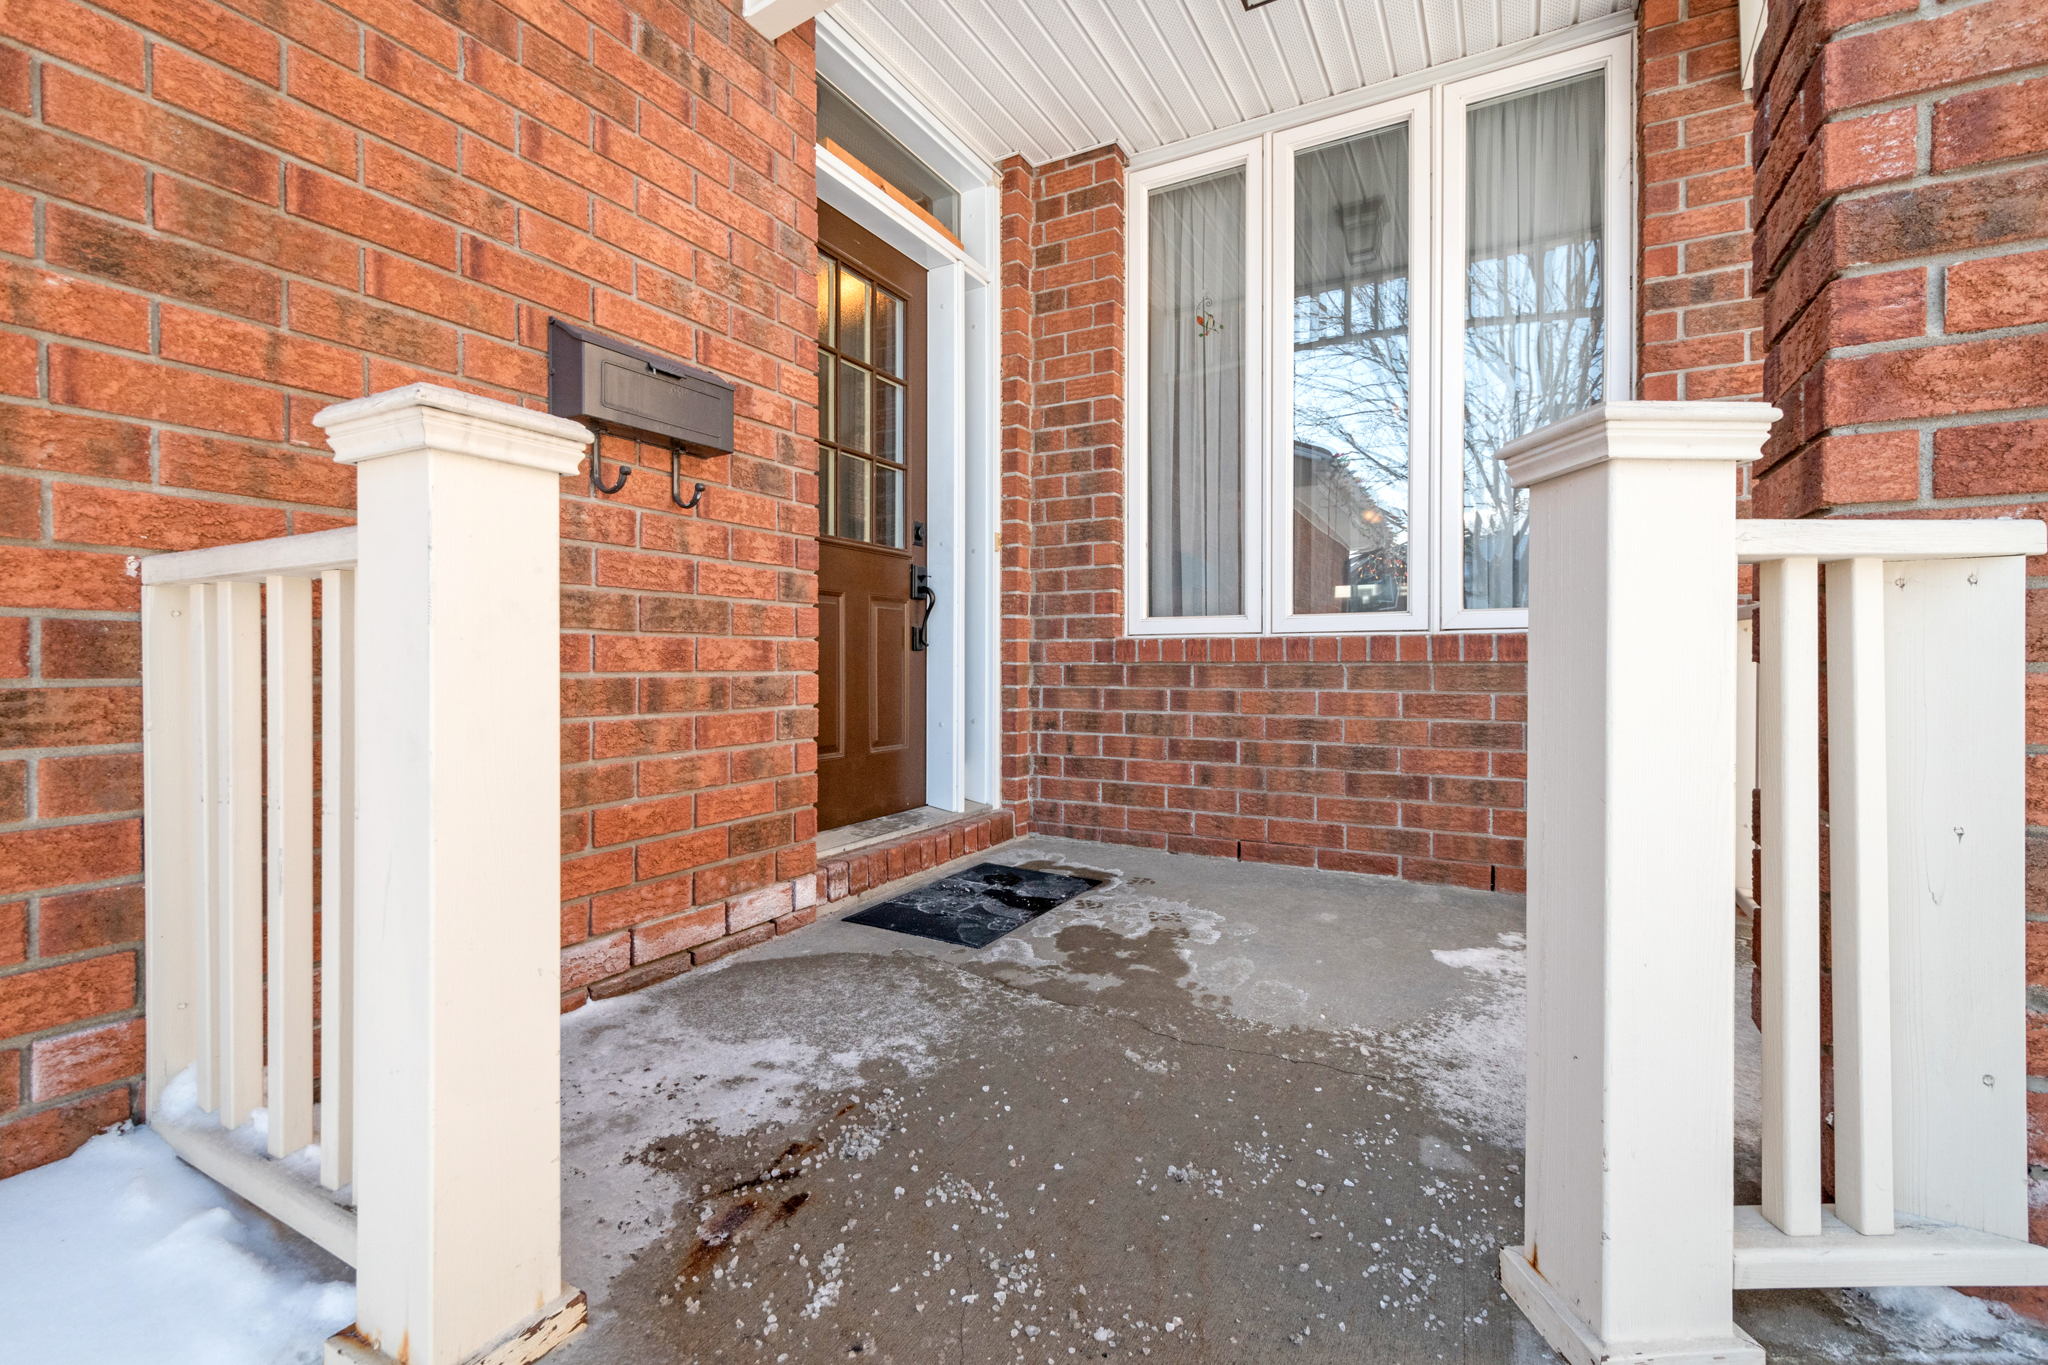 11 Milner Downs Crescent, Ottawa, ON K2M 2S6 | Tezz Photography